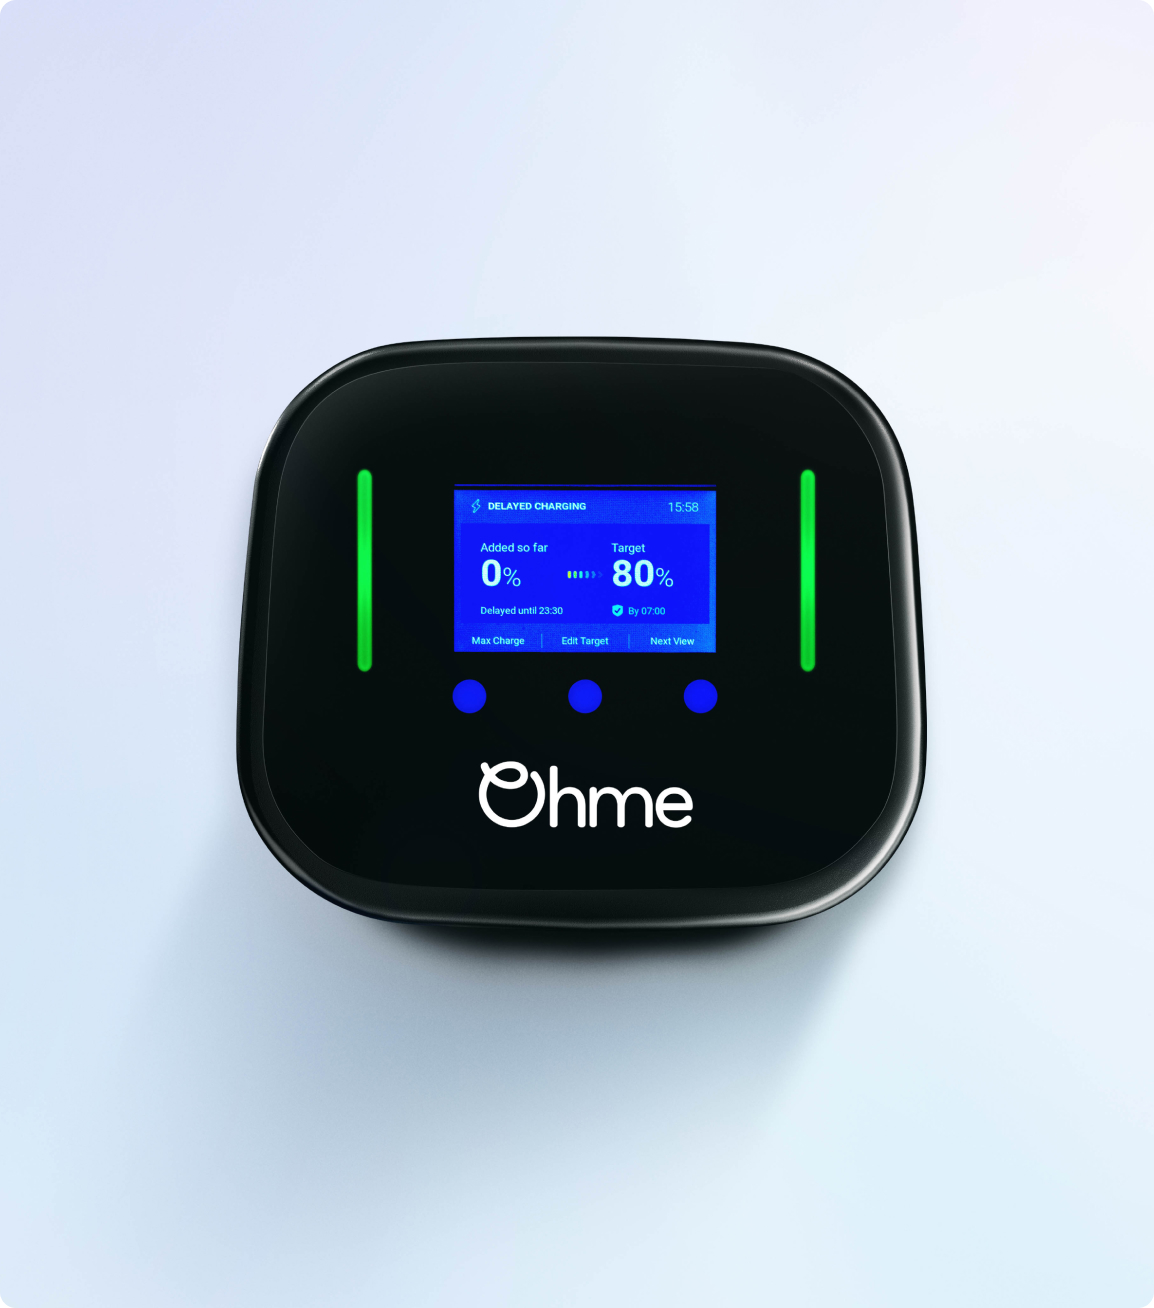 Ohme Home Pro on a clear background